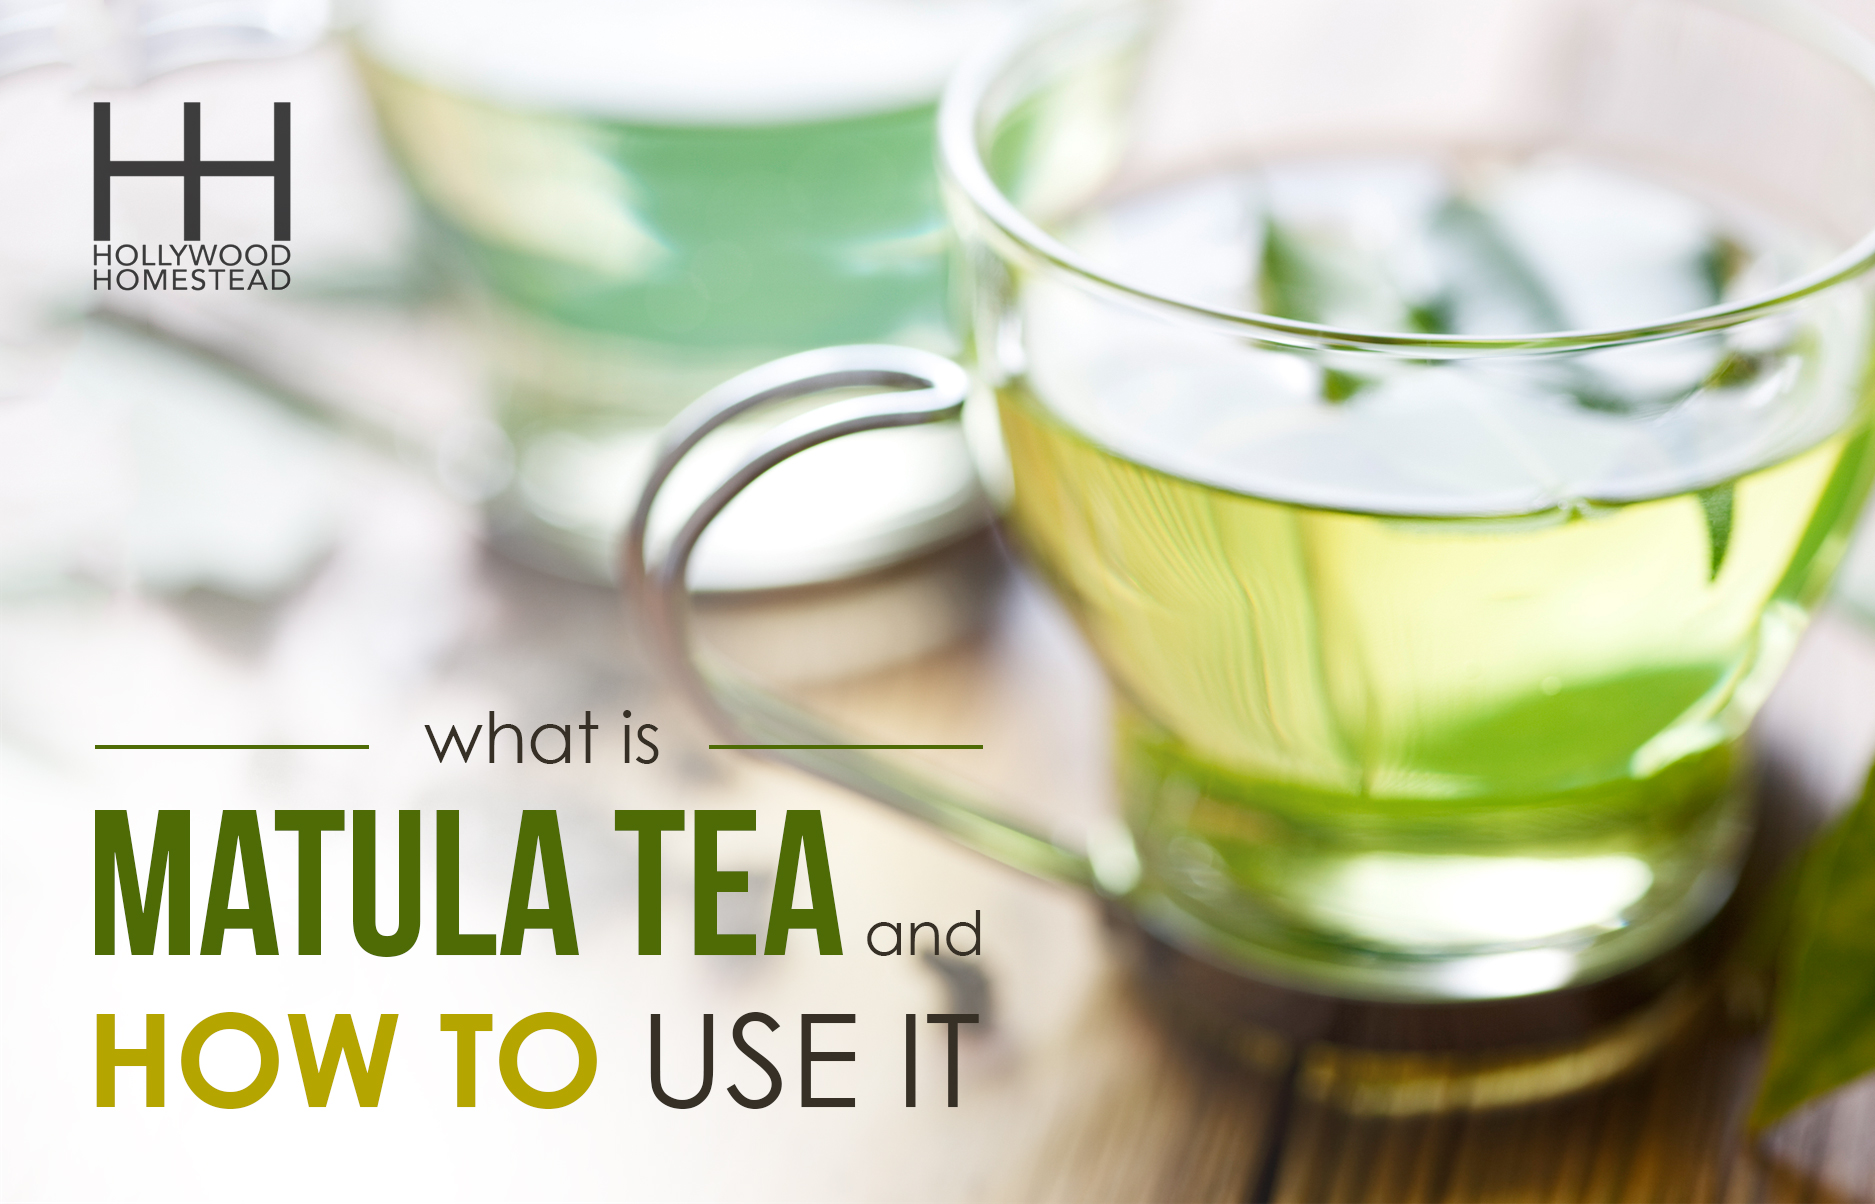 What Is Matula Tea and How to Use It